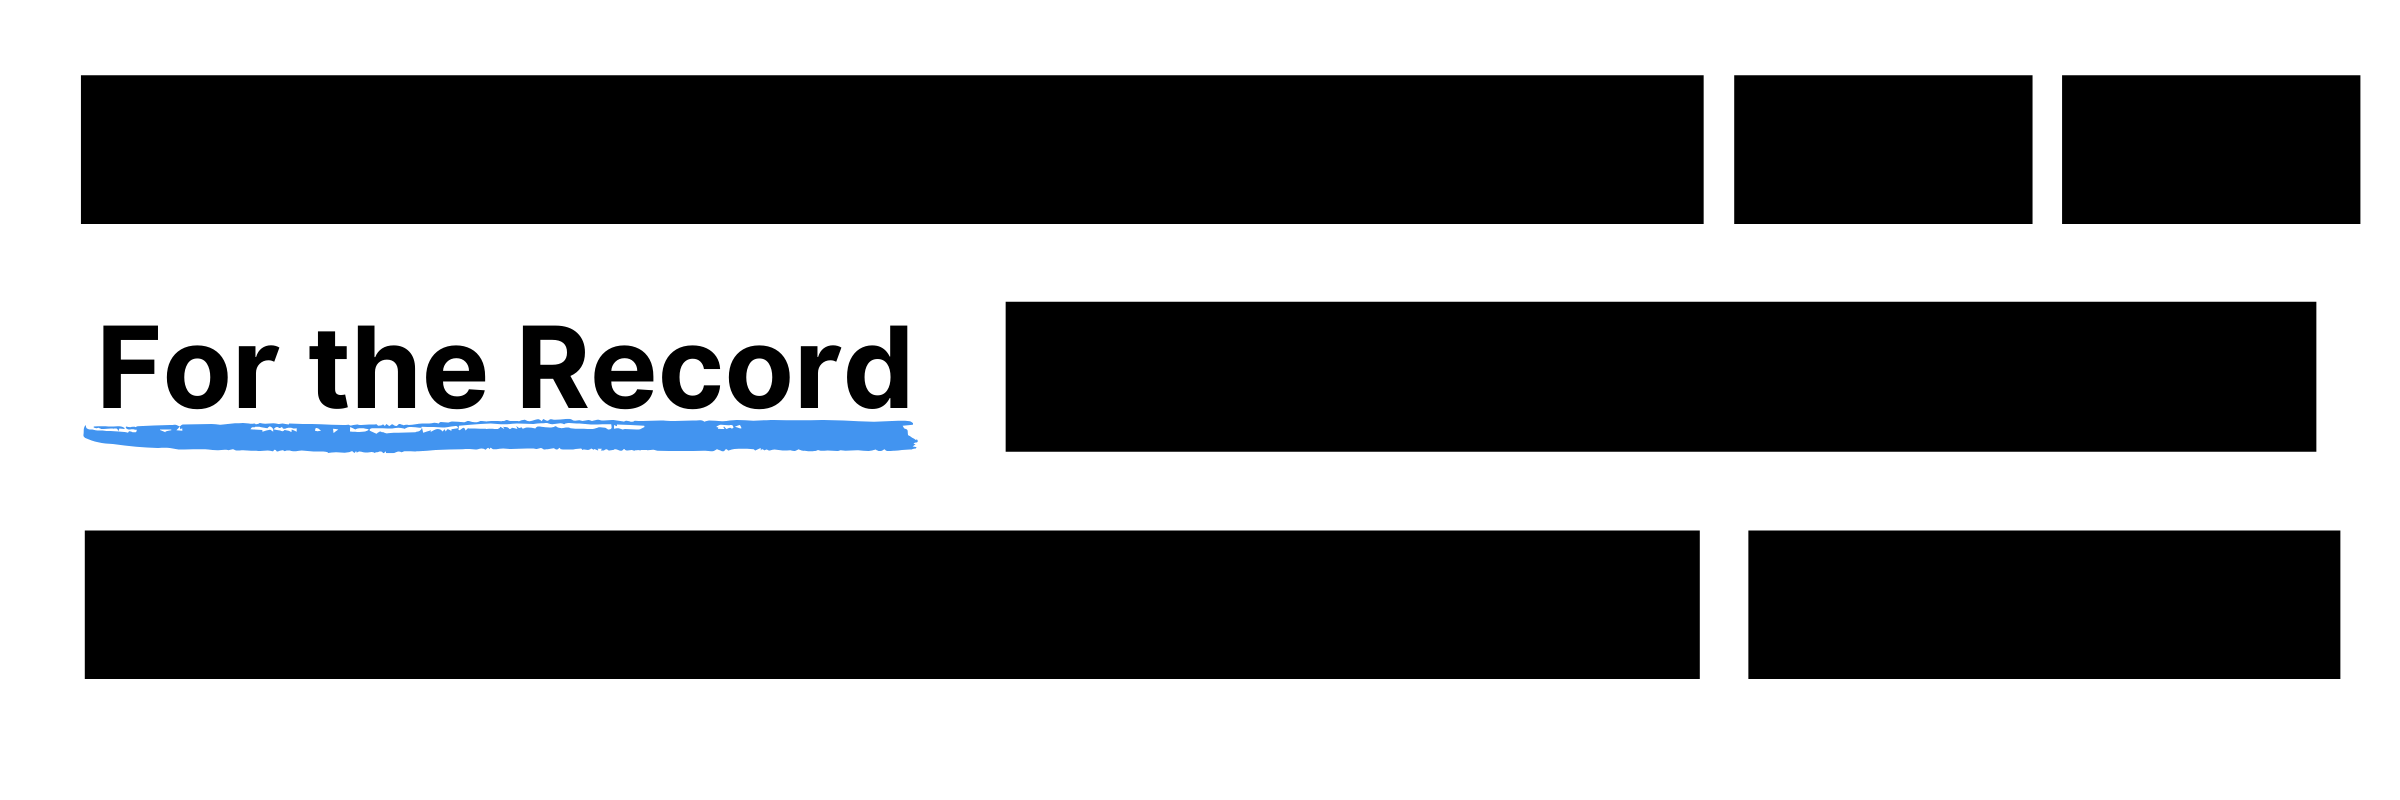 Illustration of black bars and the text "For the Record" underlined